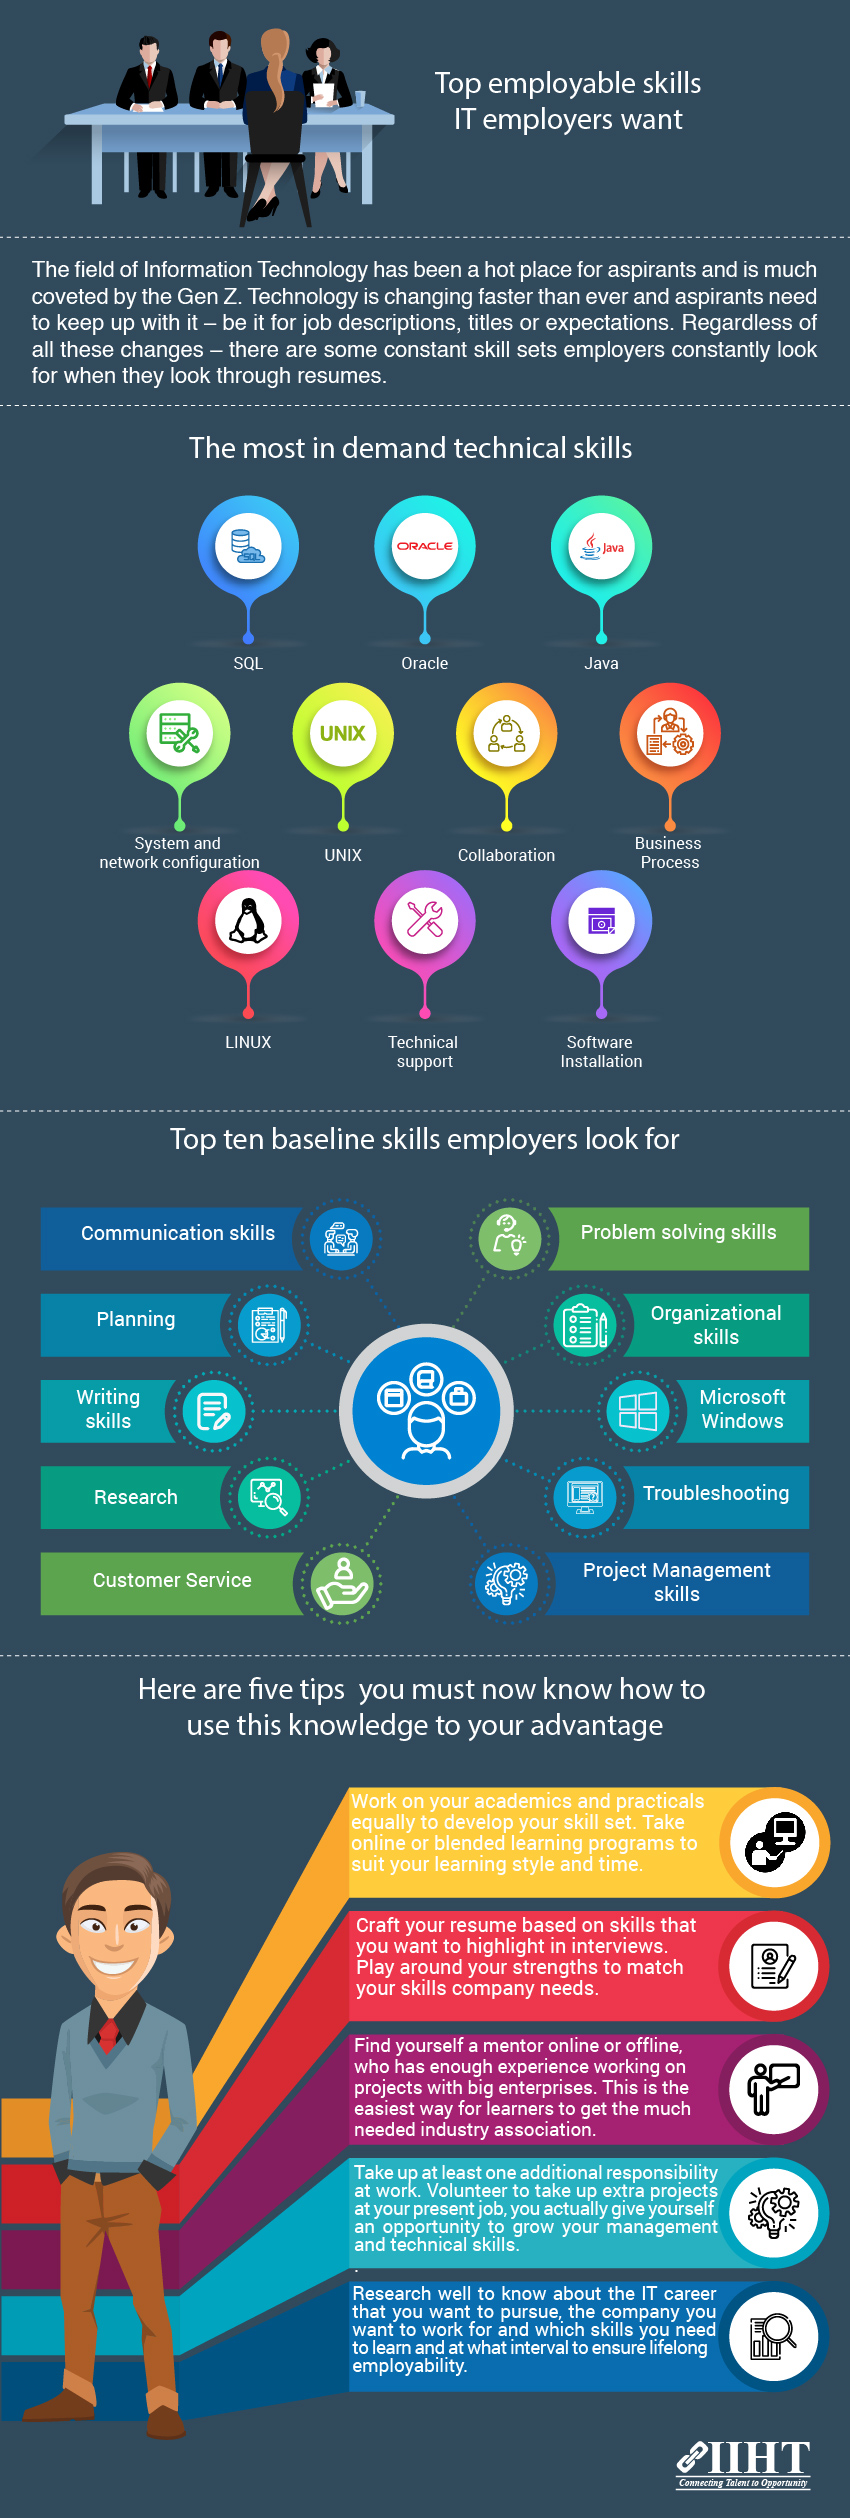 Top employable skills in IT recruitment